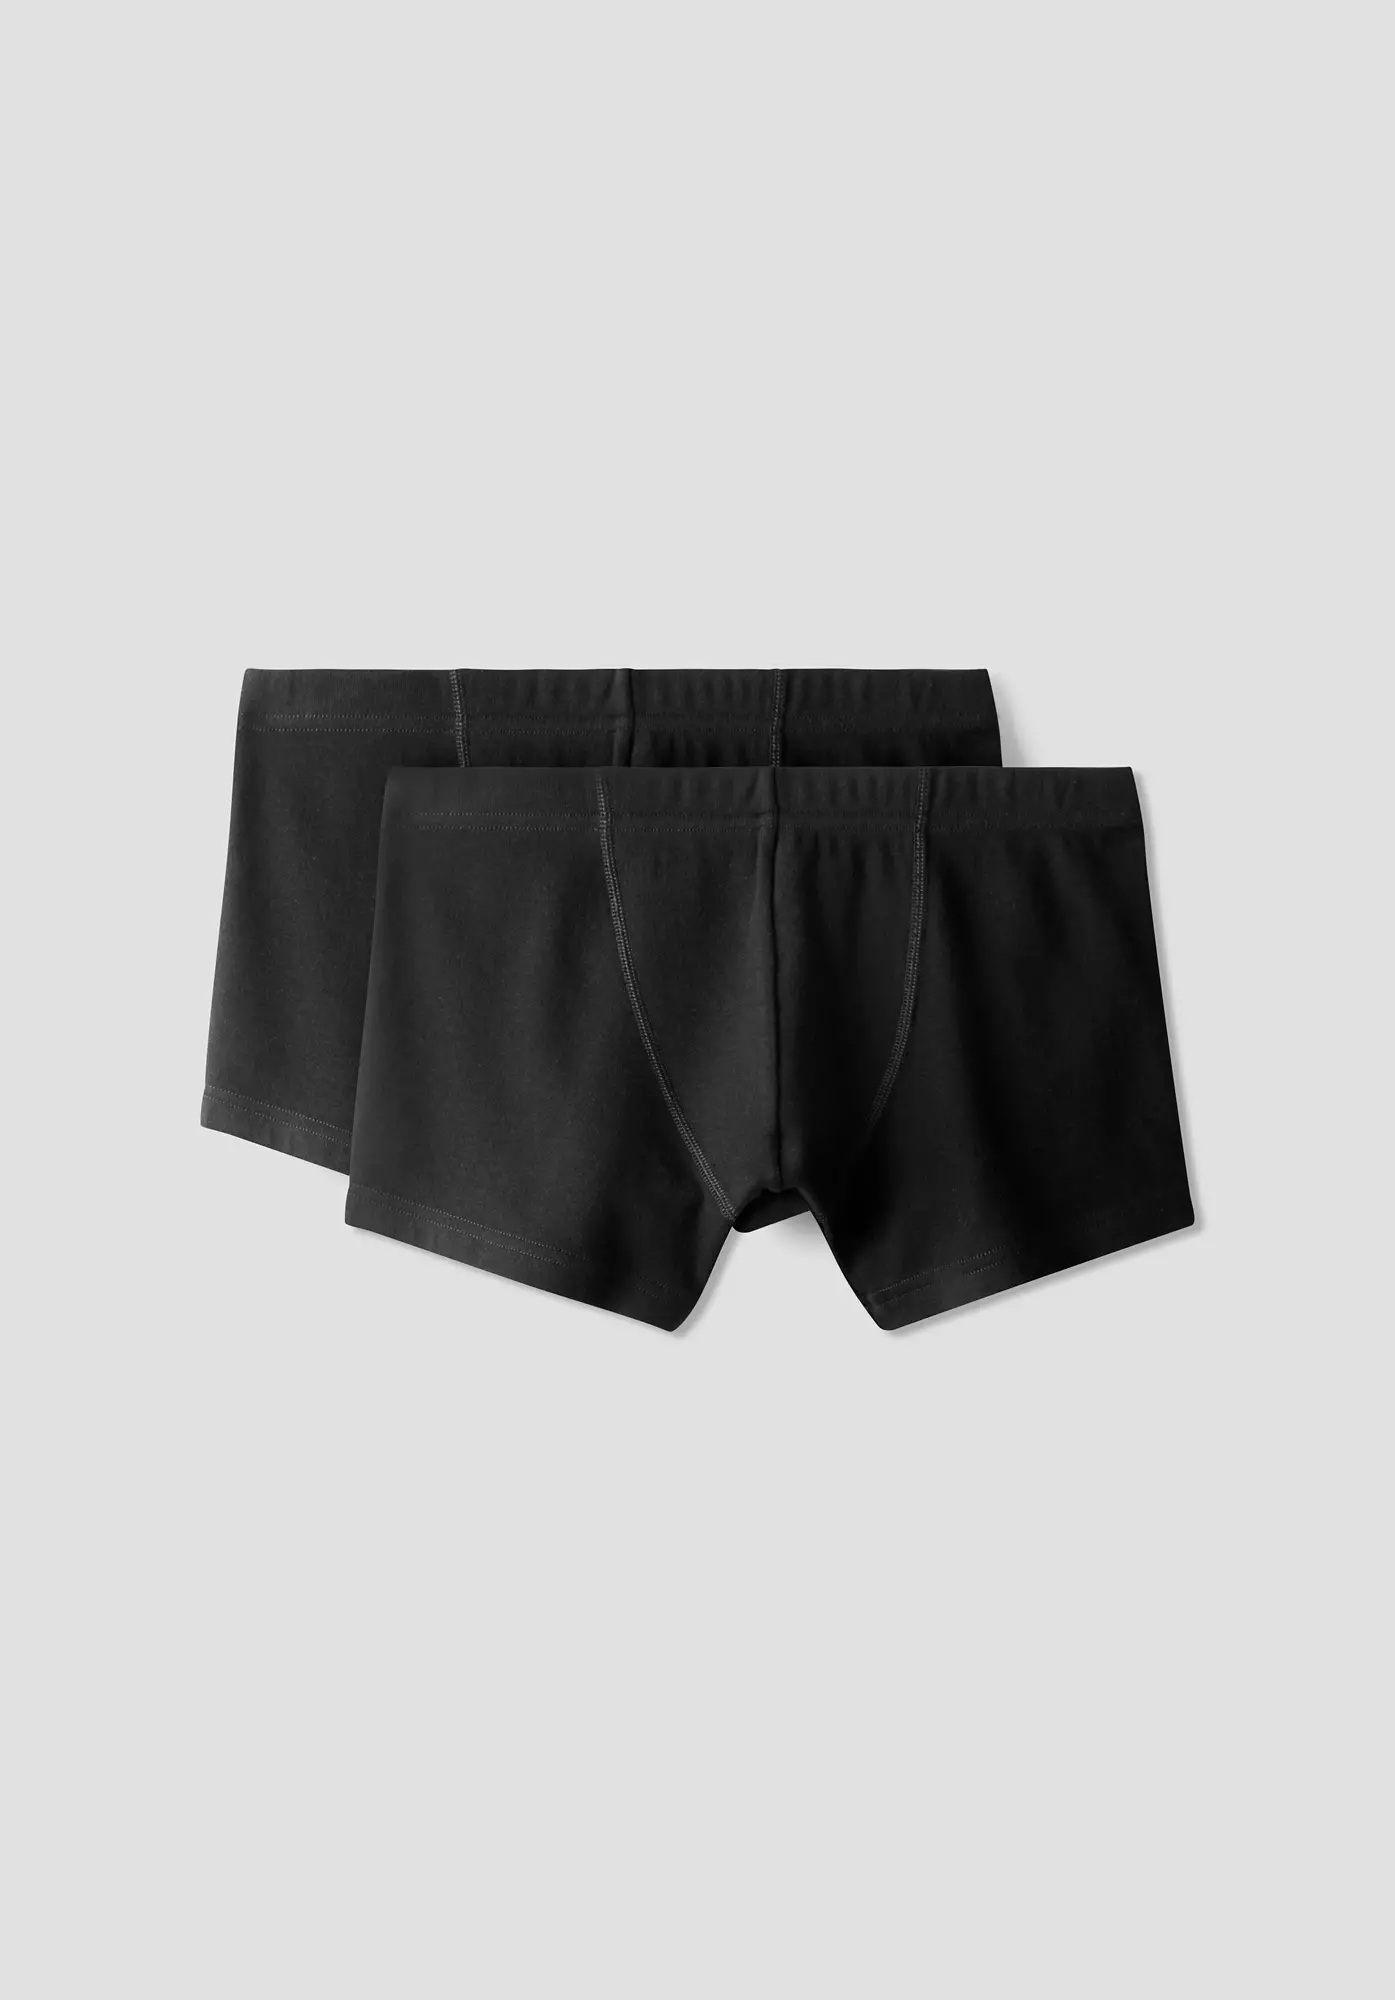 Pants PureDAILY in a set of 2 made of pure organic cotton - 5